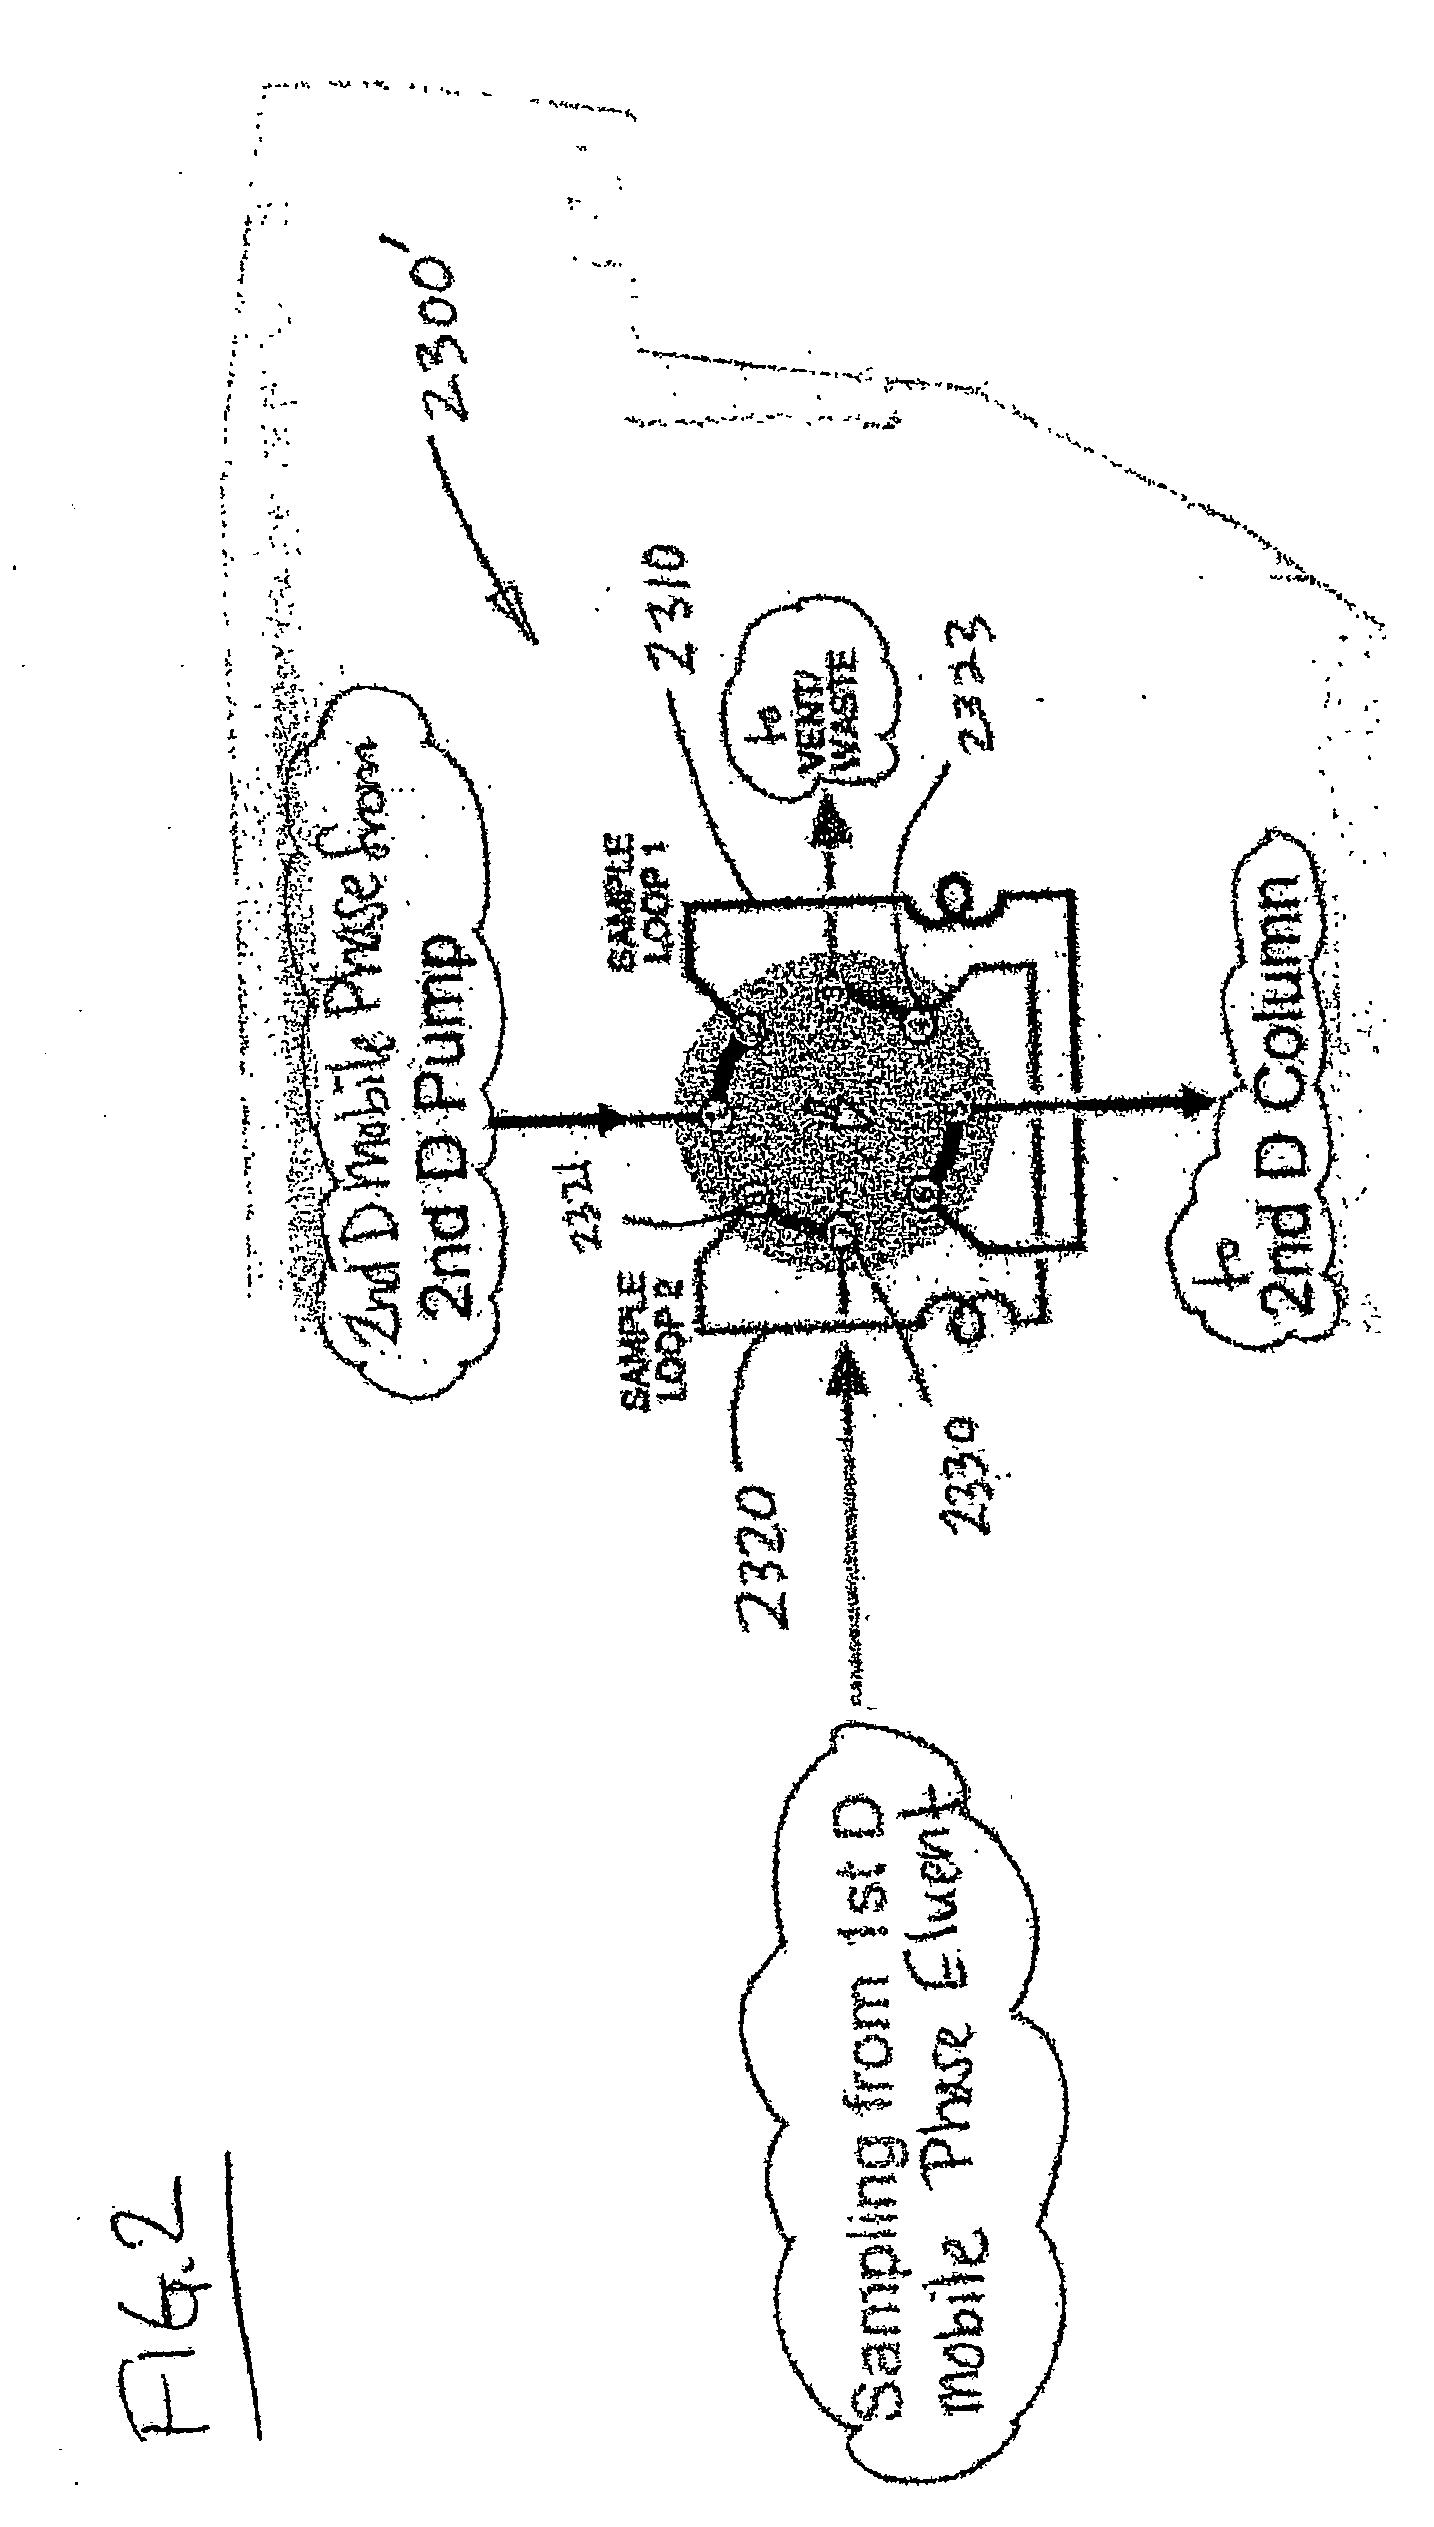 Methods and apparatus for characterization of polymers using multi-dimensional liquid chromatography with regular second-dimension sampling